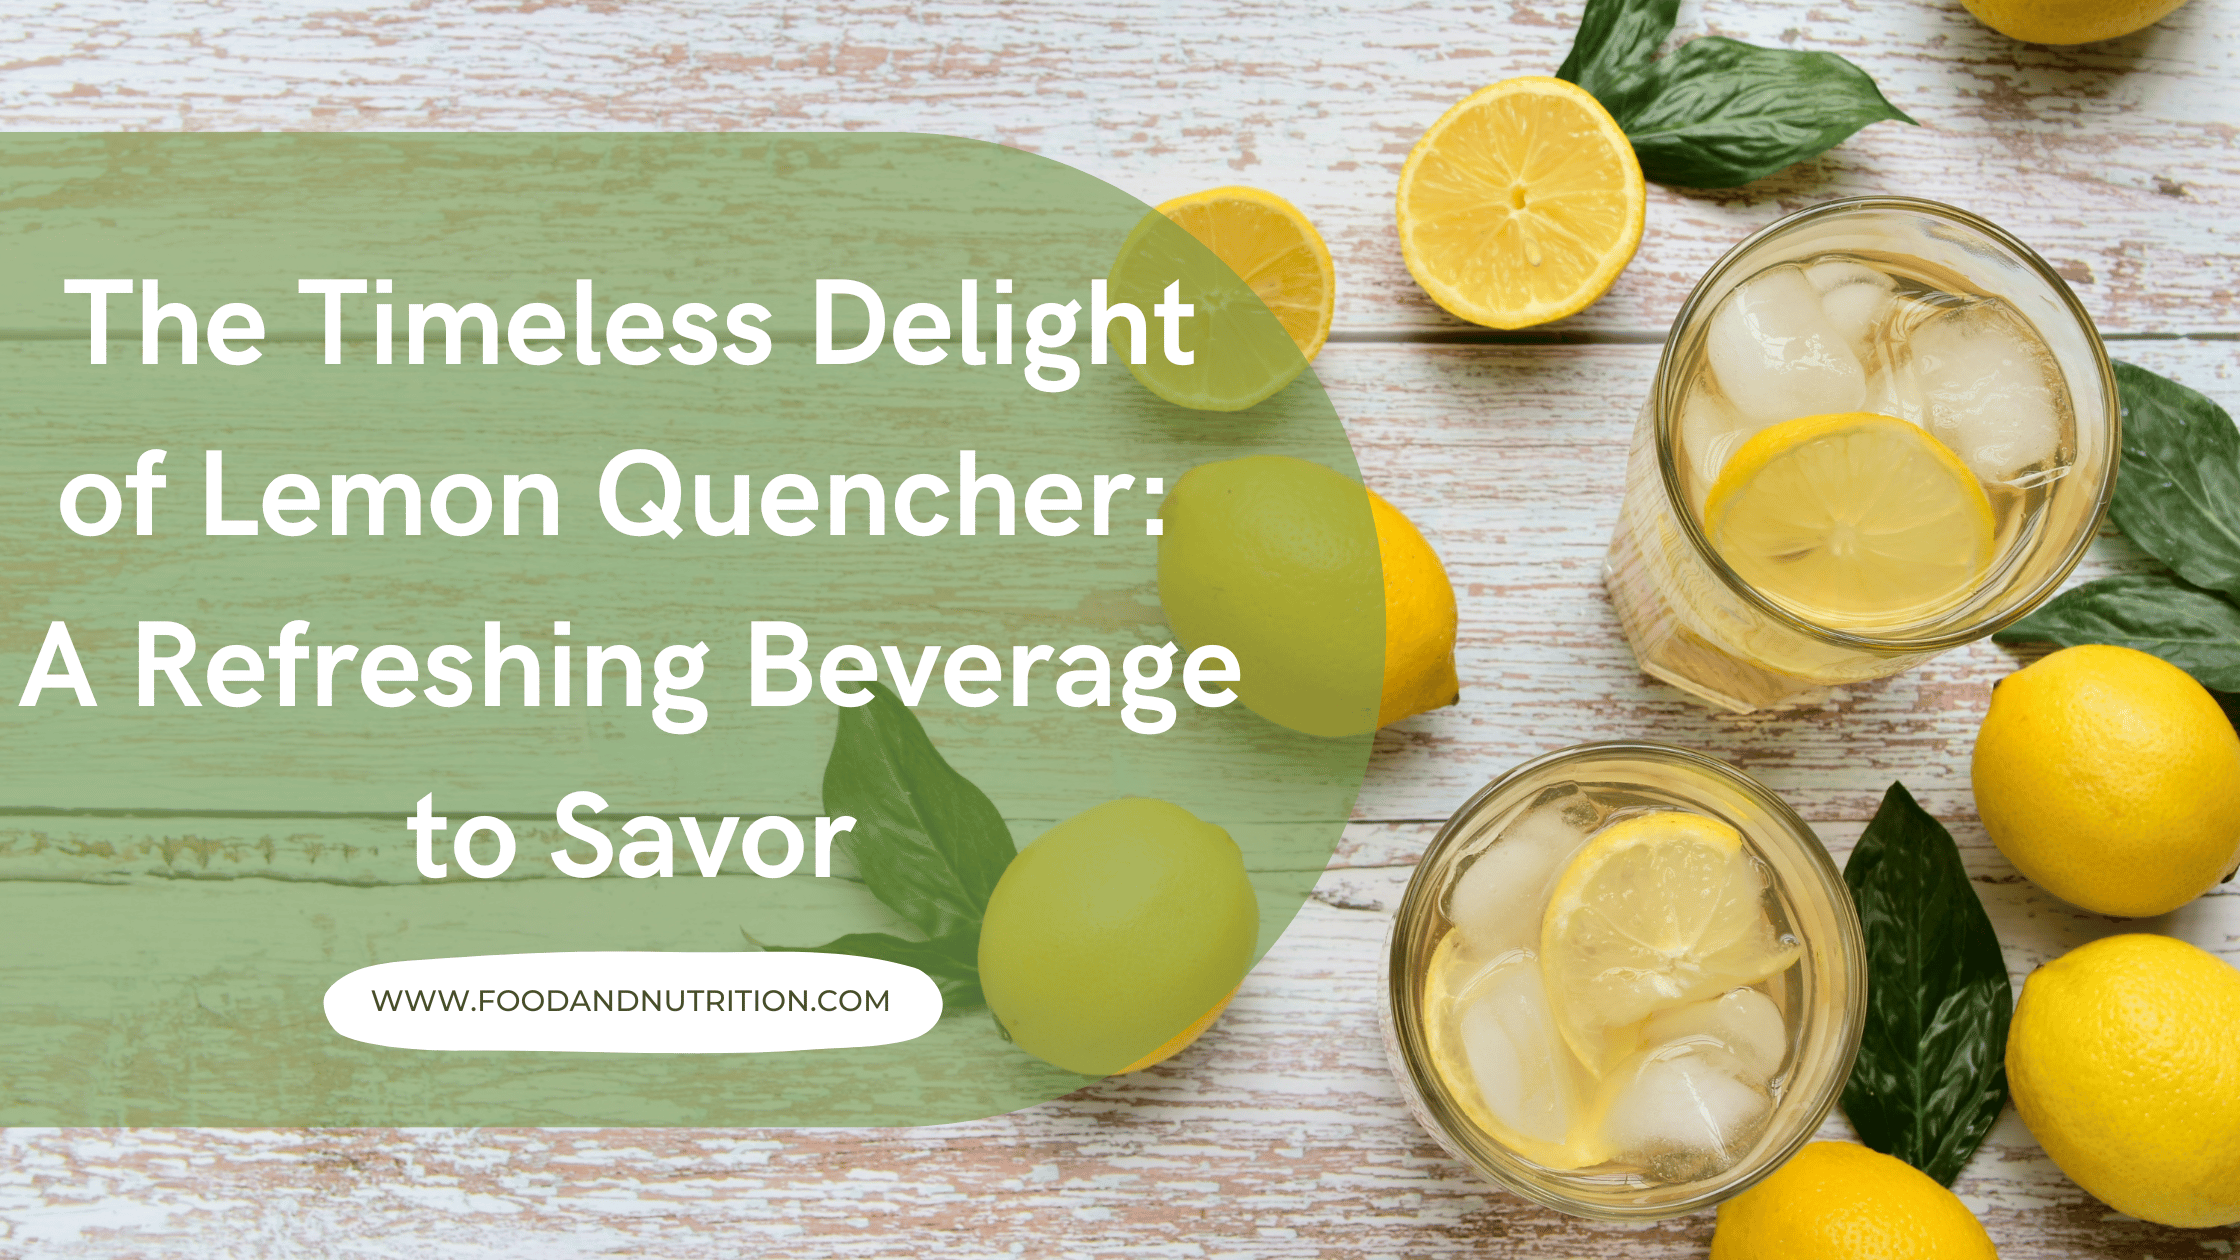 The Timeless Delight of Lemon Quencher: A Refreshing Beverage to Savor